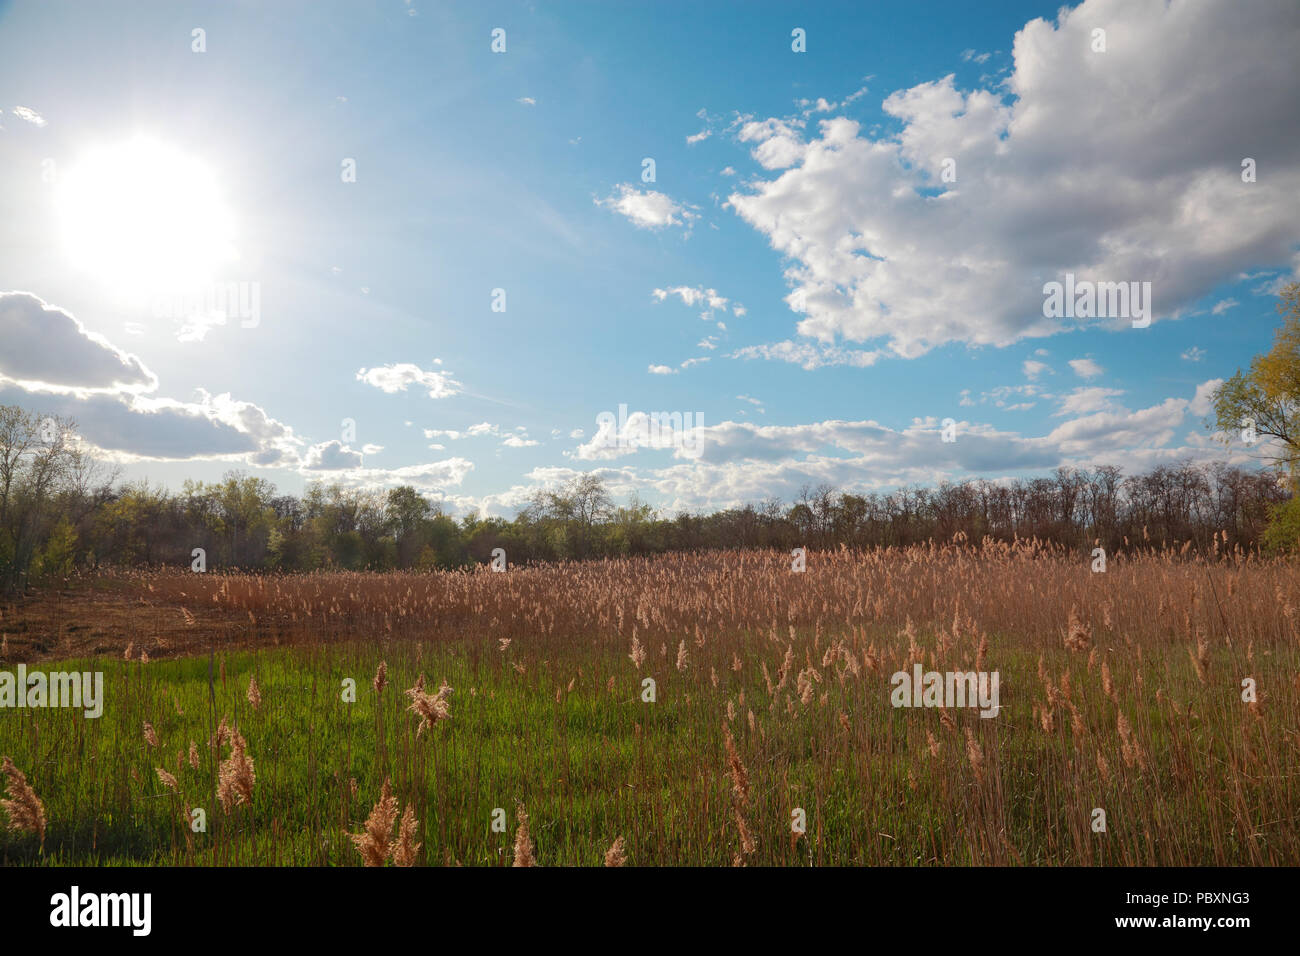 Landscape with reeds, swampy terrain Stock Photo